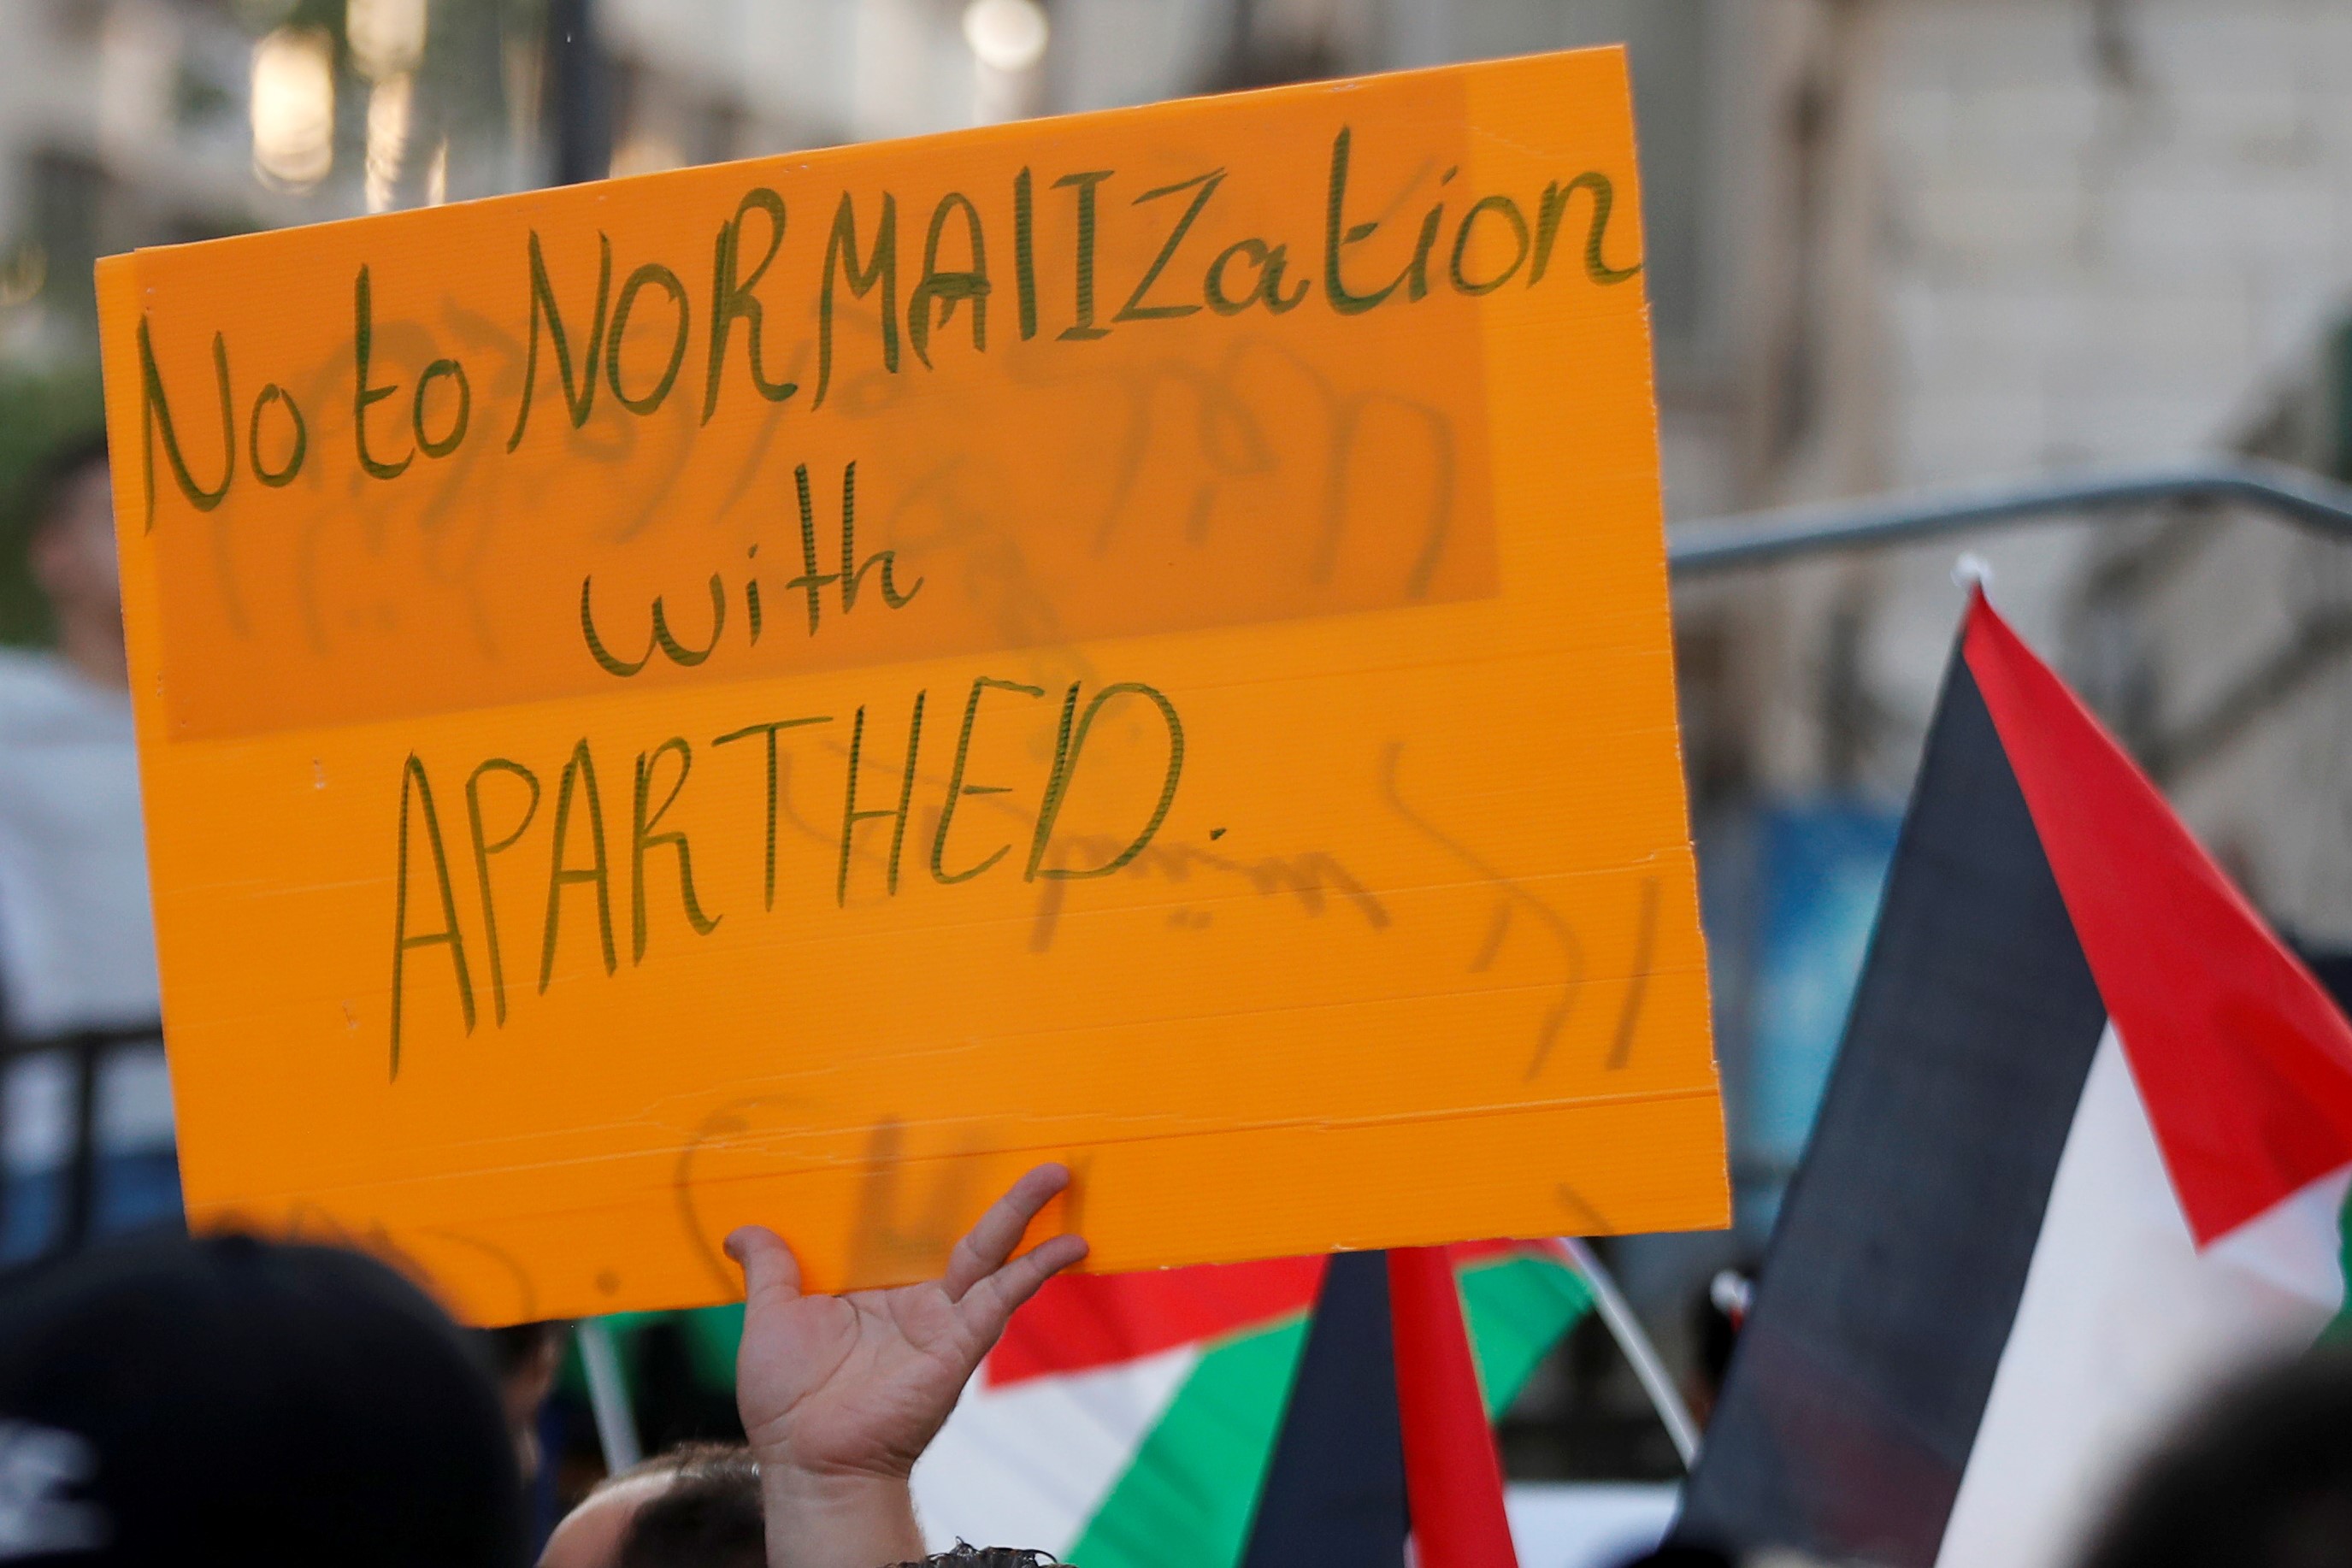 A Palestinian demonstrator holds a sign during a protest against the United Arab Emirates and Bahrain's deal with Israel to normalise relations, in Ramallah in the Israeli-occupied West Bank September 15, 2020